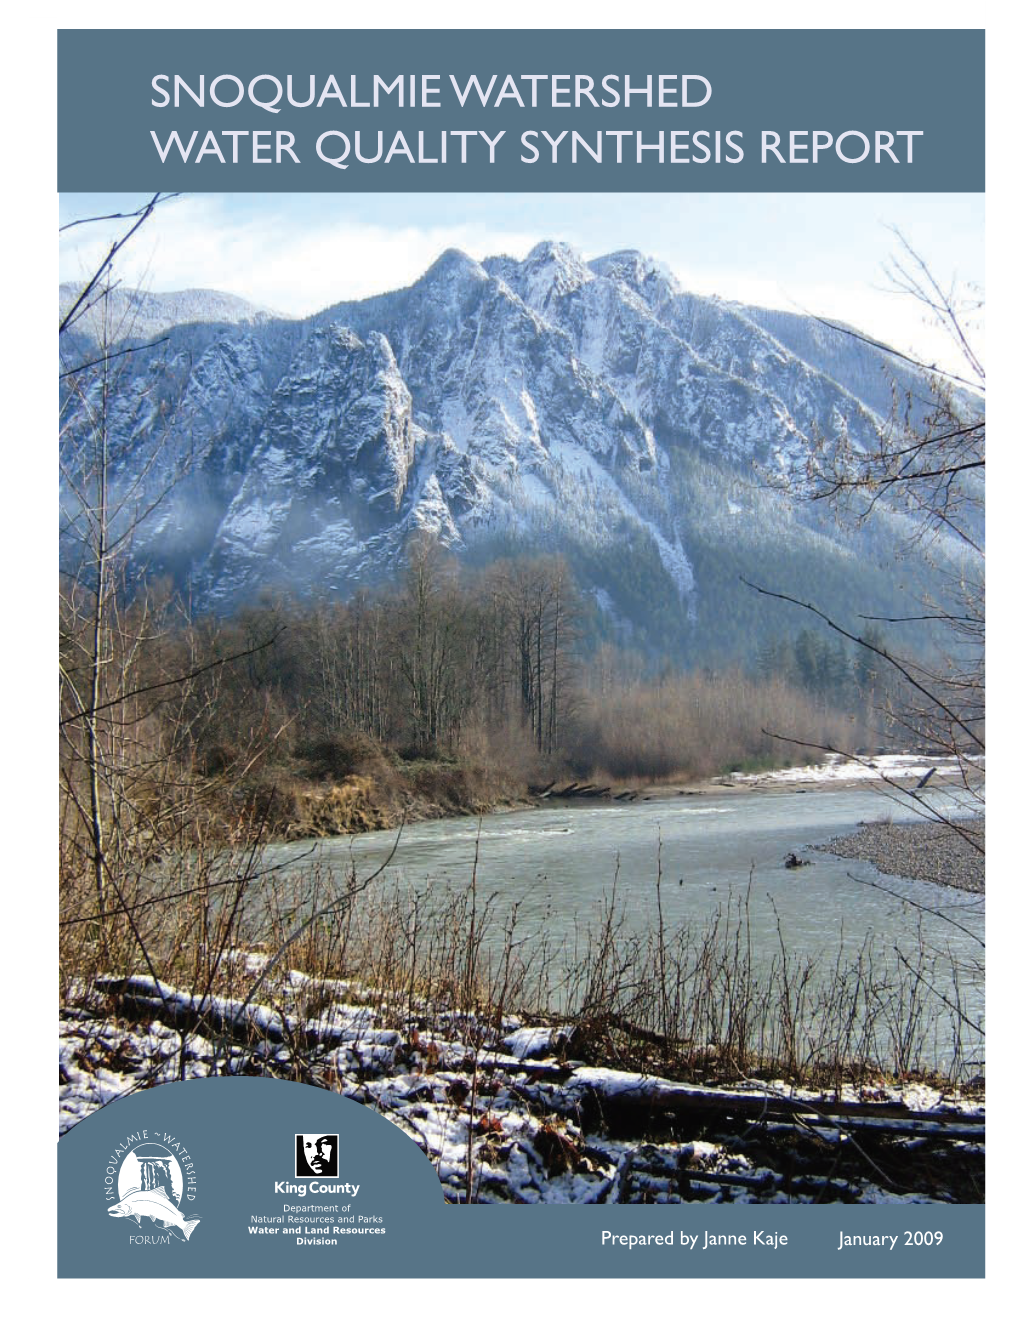 Snoqualmie Water Quality Synthesis Report